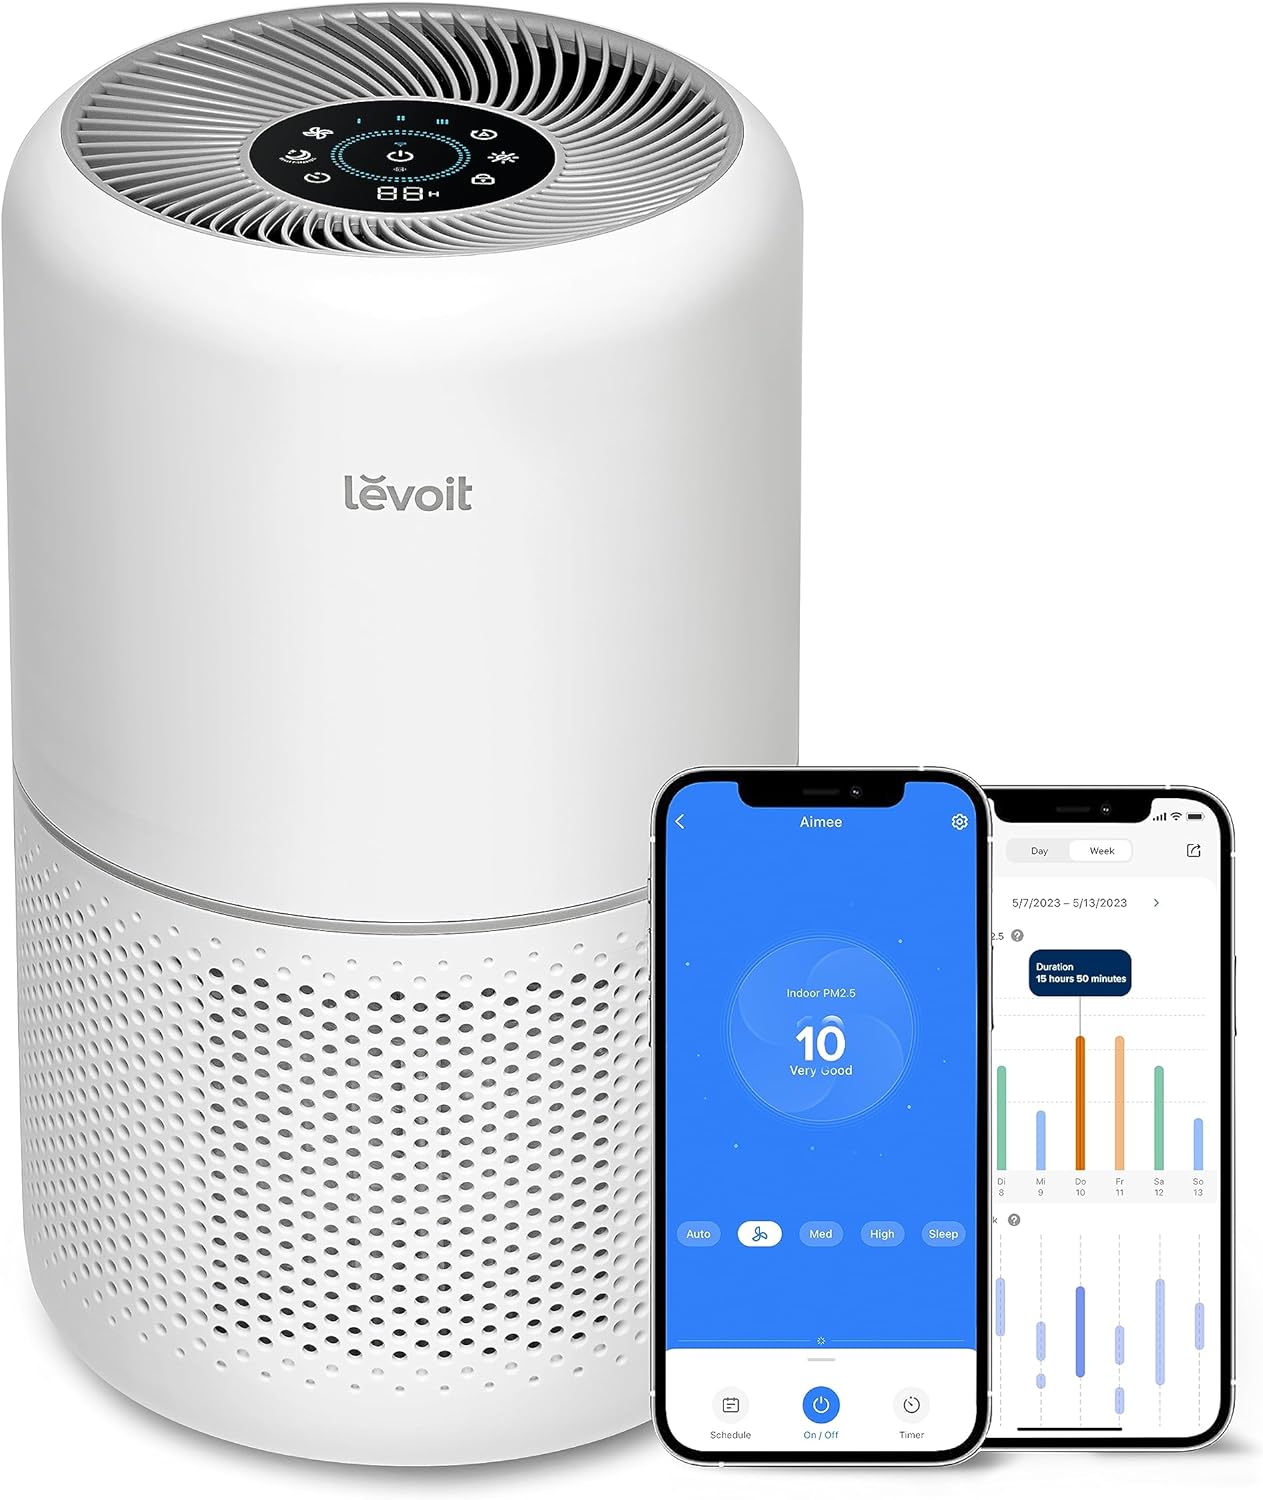 LEVOIT Air Purifiers for Home Bedroom, Smart WiFi, Auto Mode, Covers Up to 1095 Ft for Home Large Room, Quiet Cleaner for Pets, Allergies, Dust, Smoke, White Noise, Core 300S / Core300S-P, White